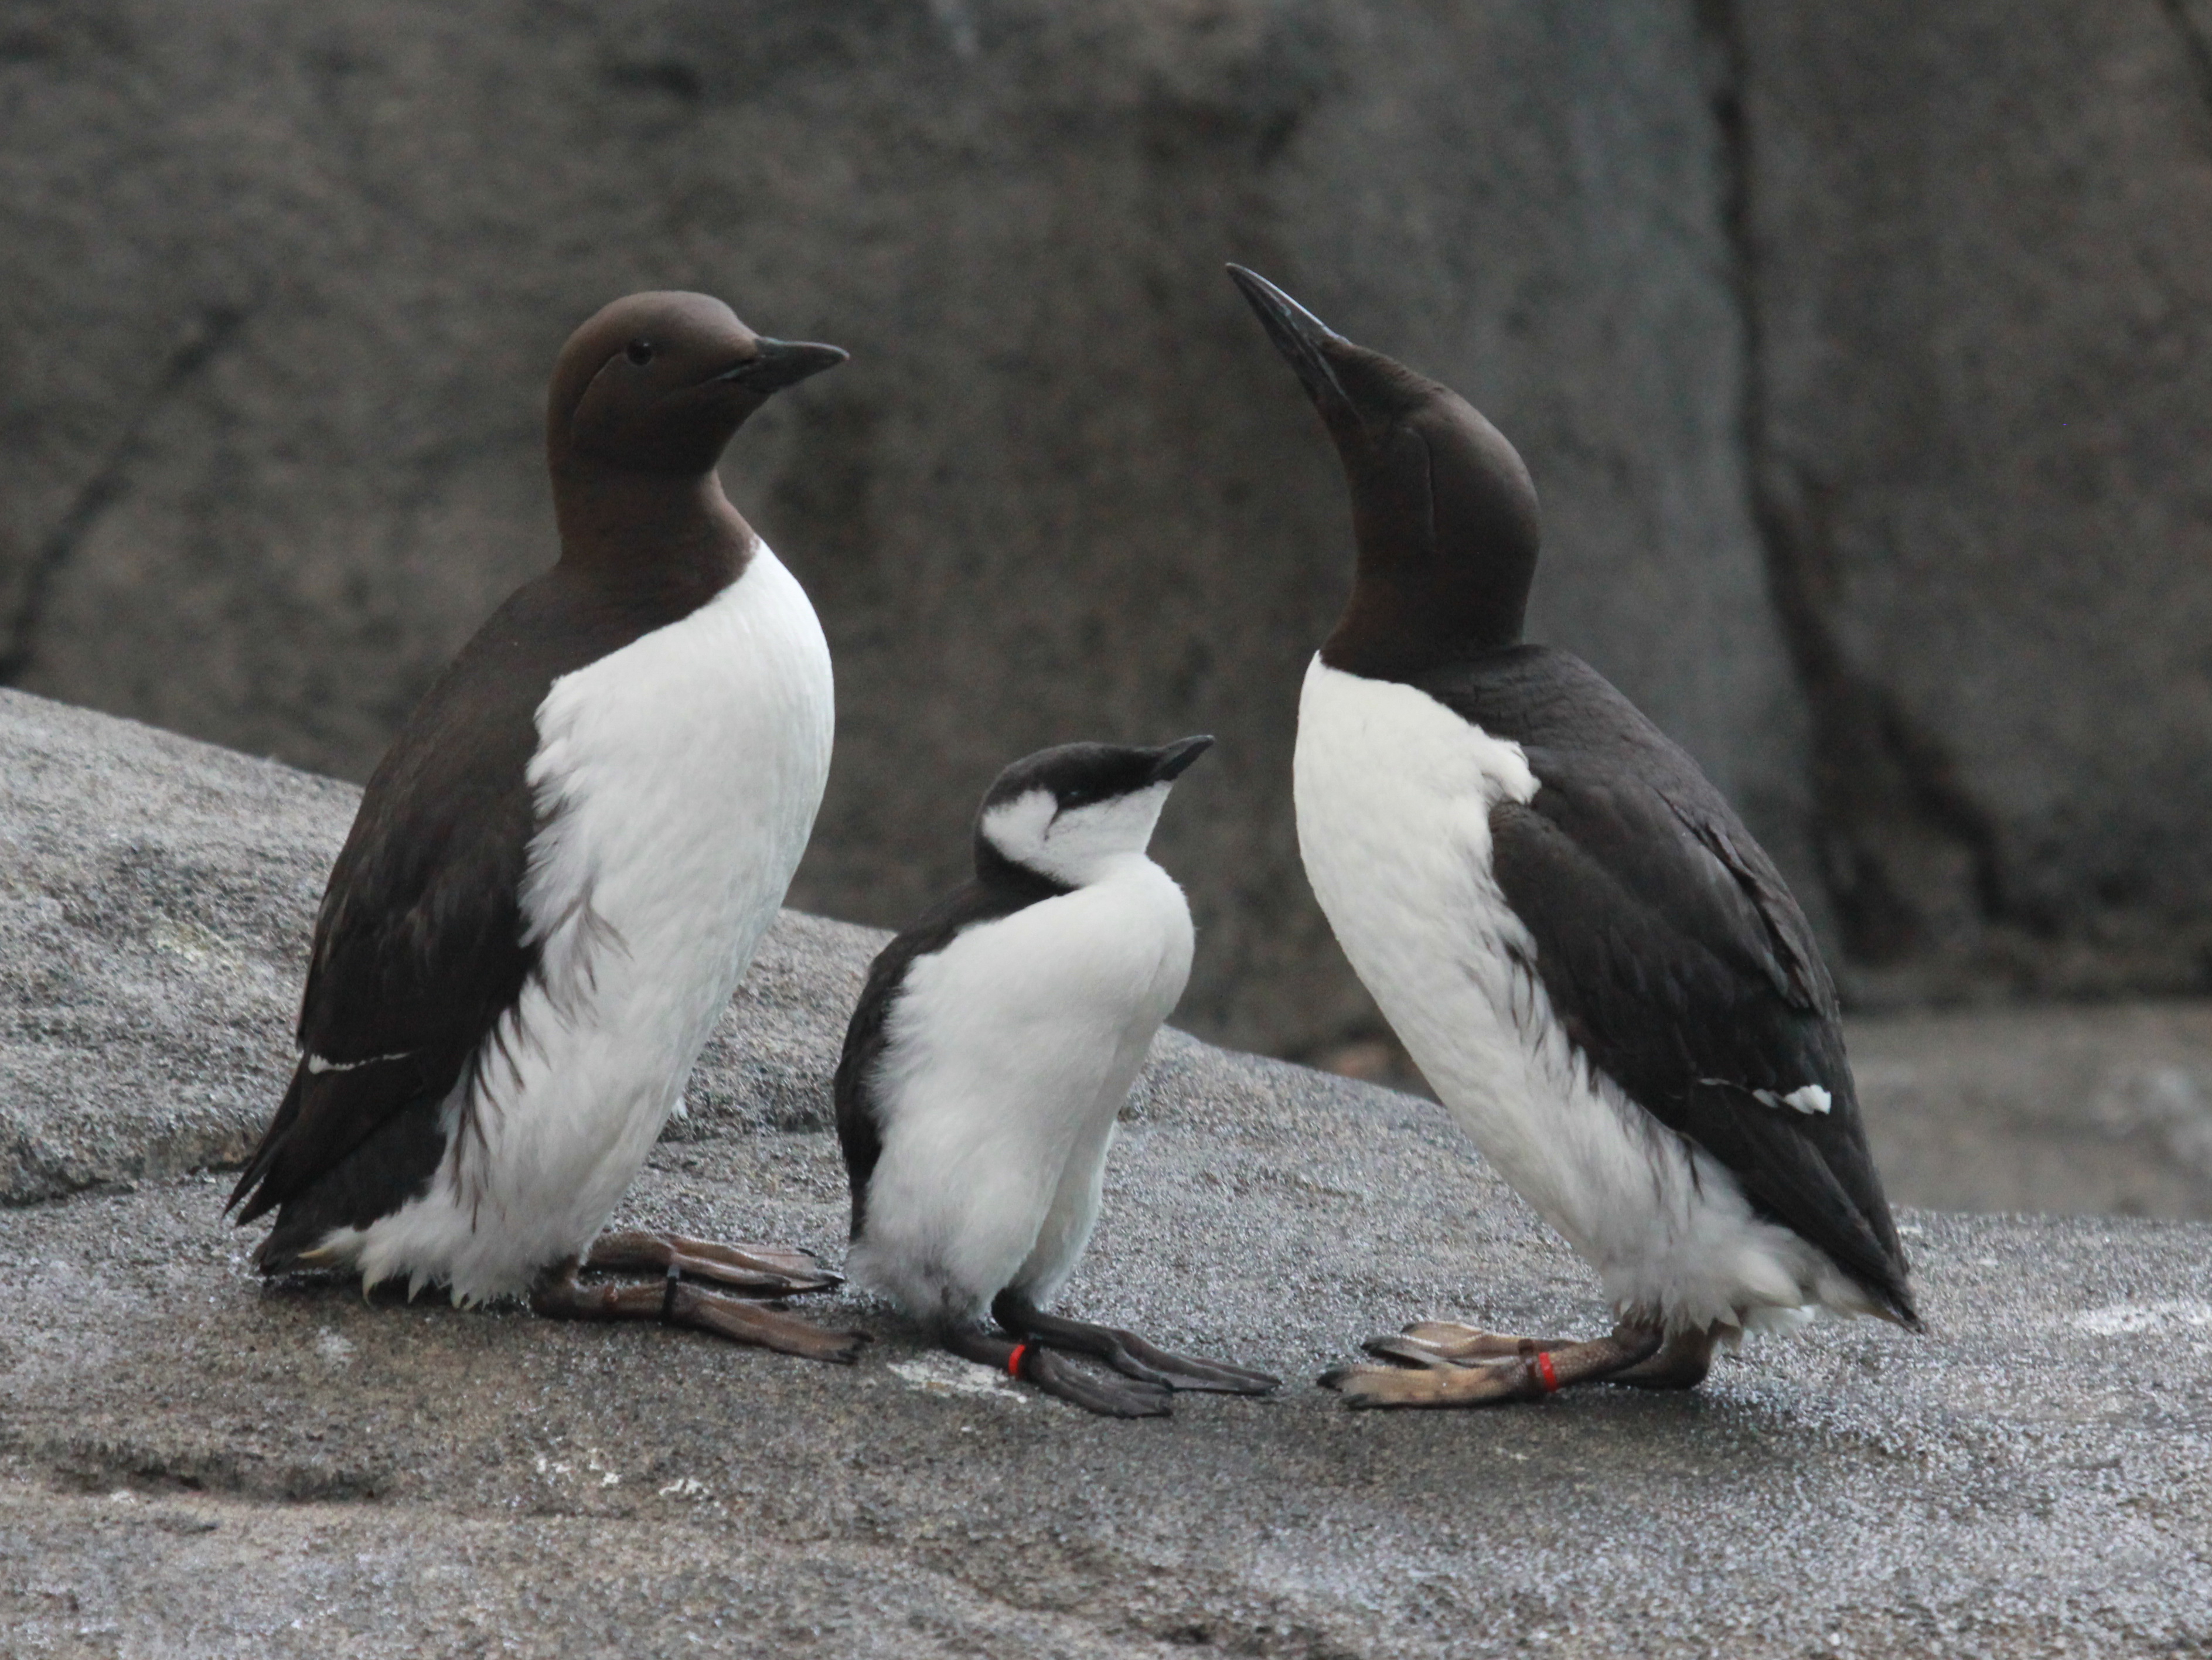 Common Murre ( Uria aalge), also known as Common Guillemot. Photographed at Alaska SeaLife Center in Seward, Alaska. (Creative Commons photo courtesy of Dick Daniels)